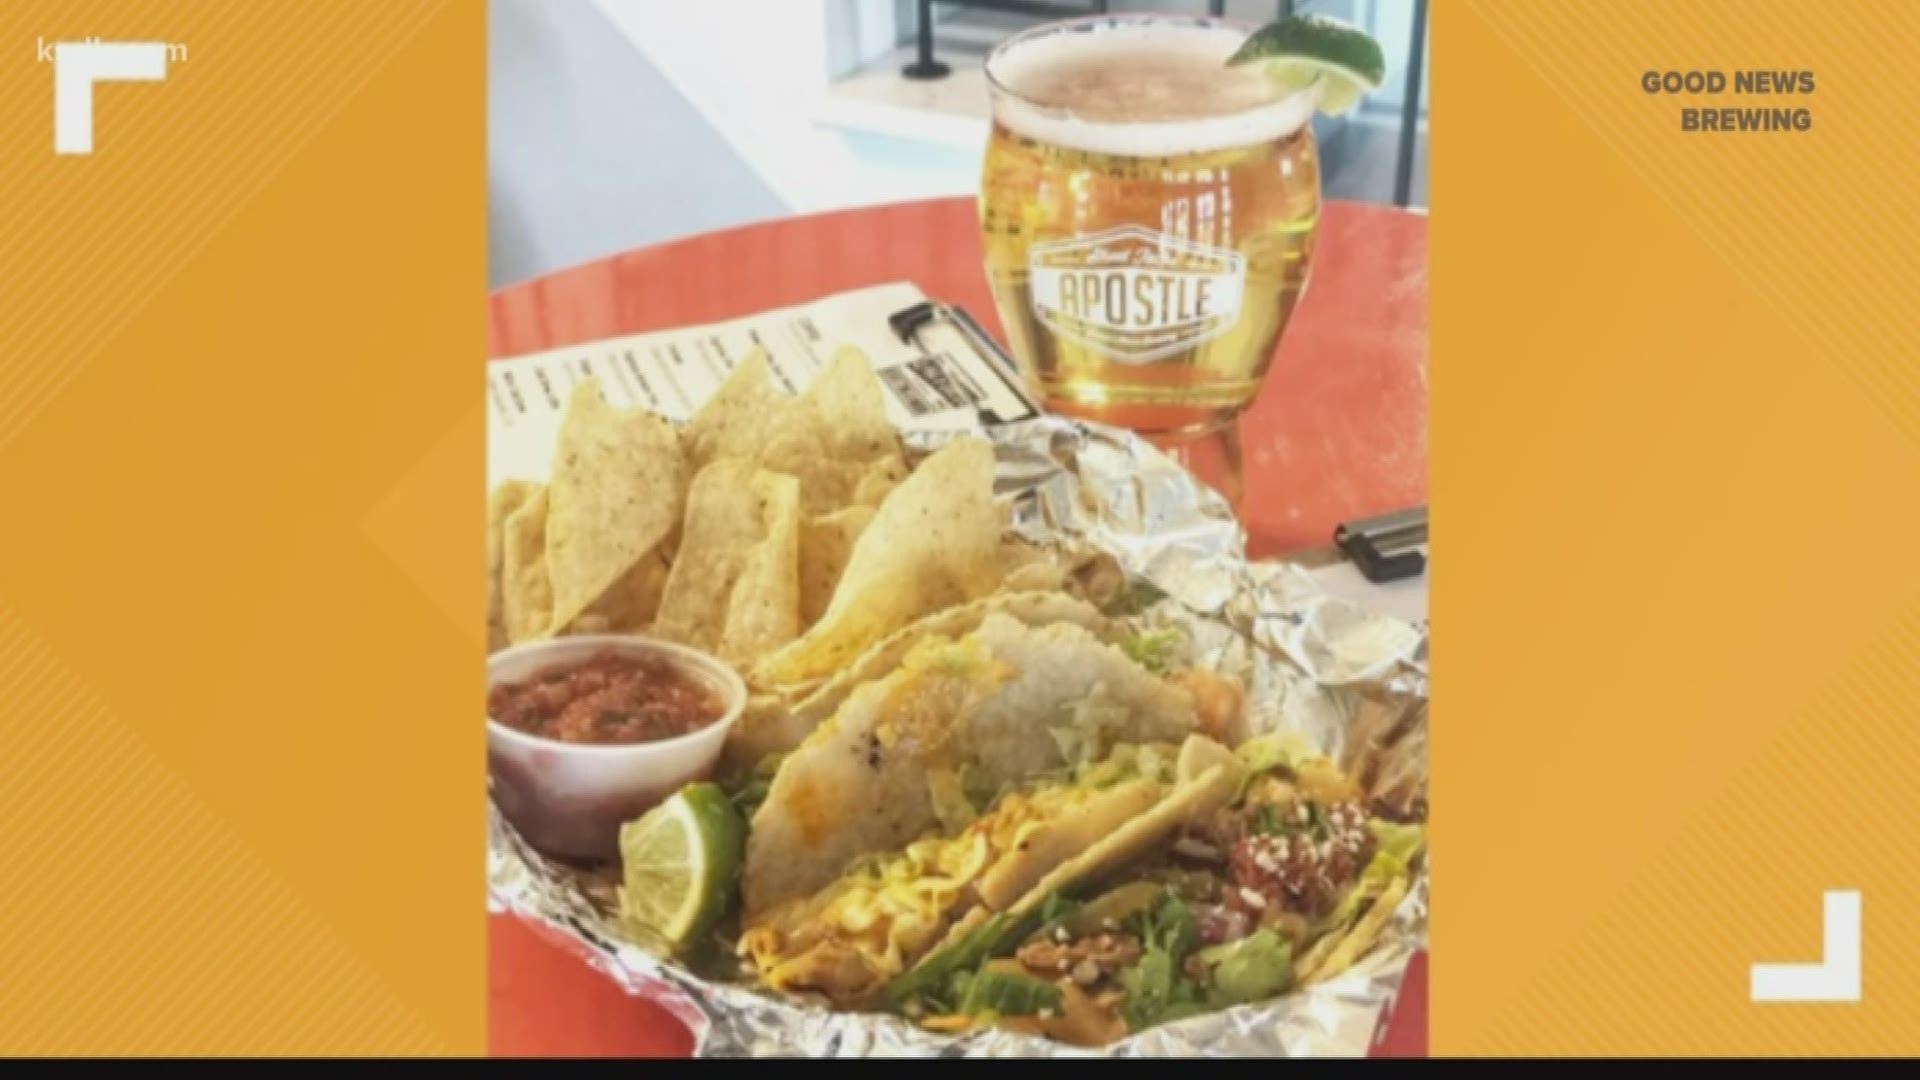 Apostle Street Tacos is located inside Alpha and Omega Coffee Roasting at 111 N. Main Street